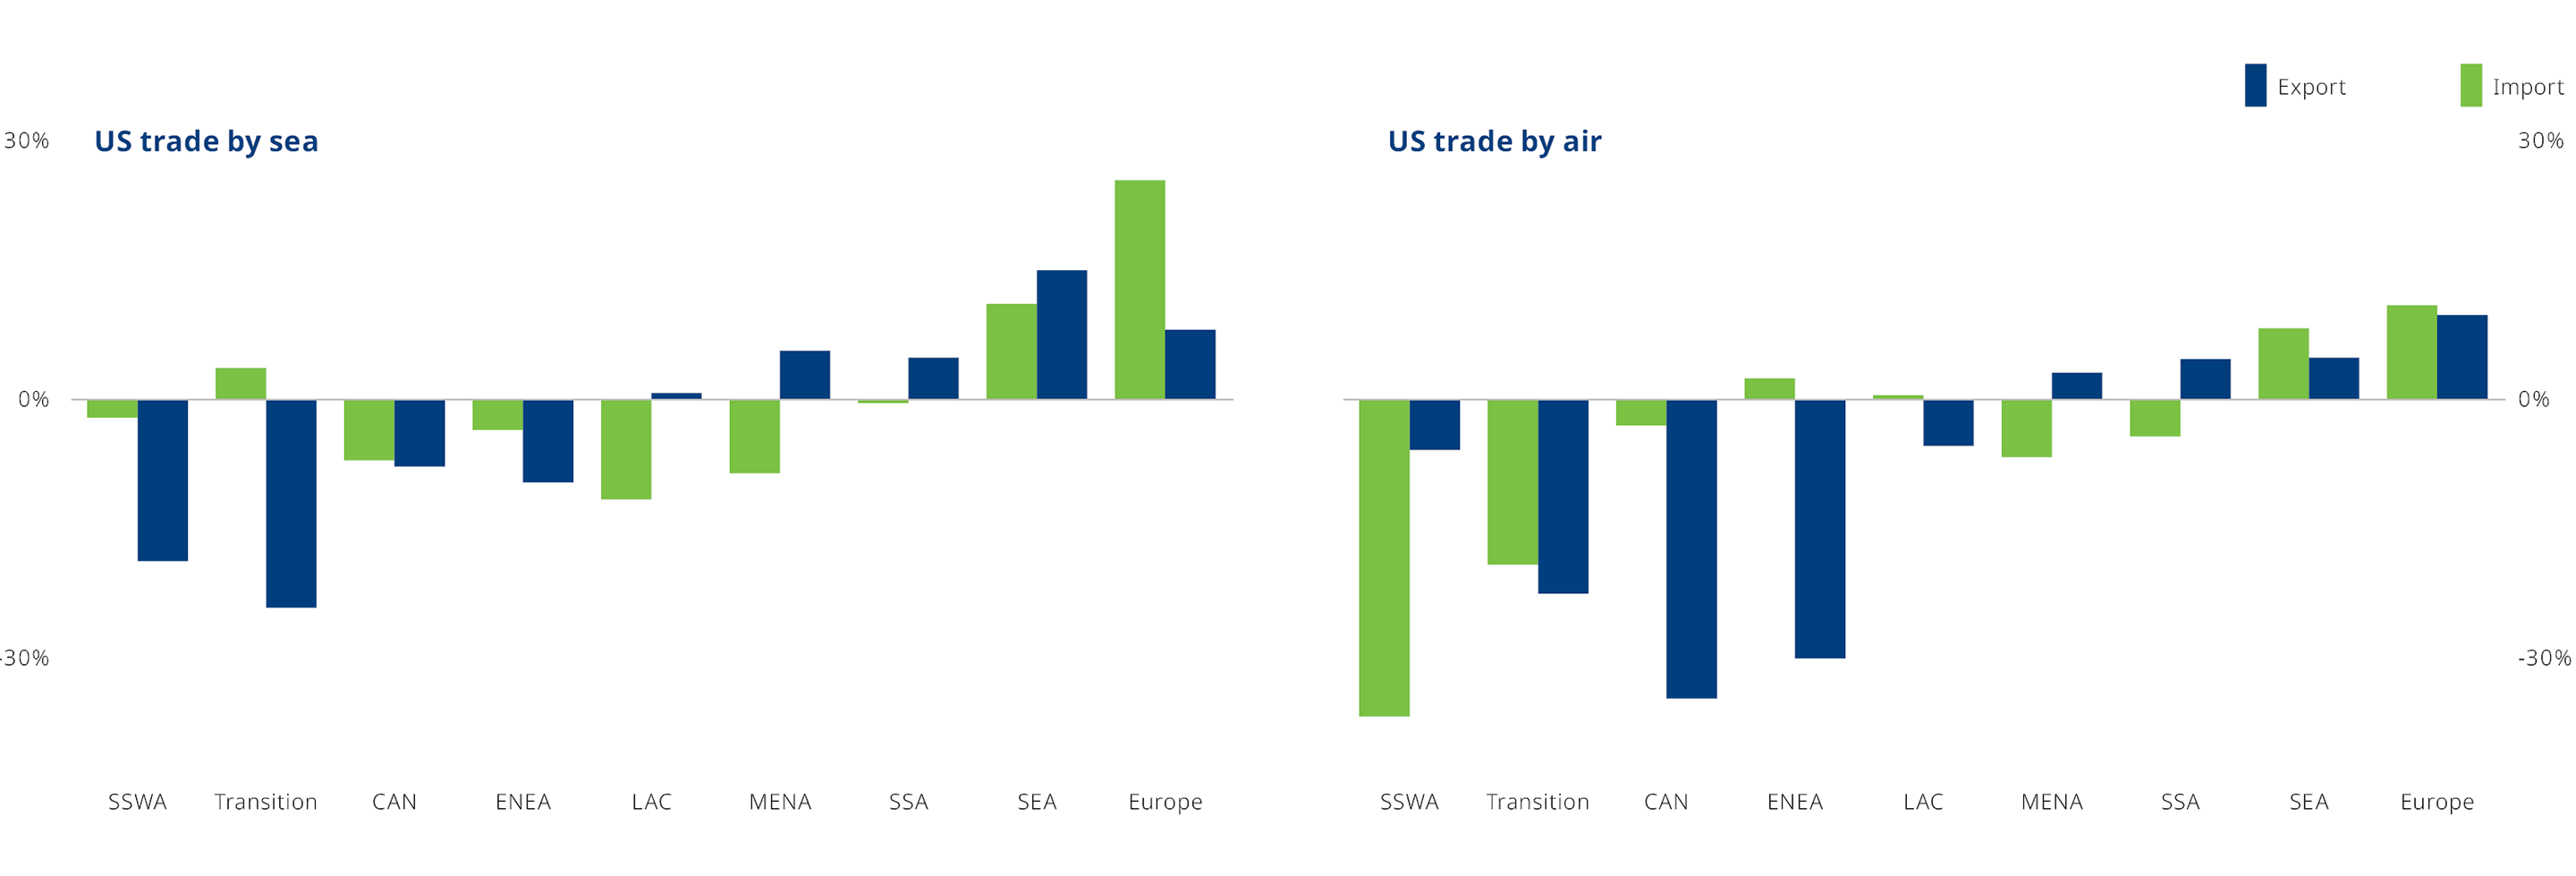 US sea exports to Europe have risen substantially, while air exports to transition economies have plummeted